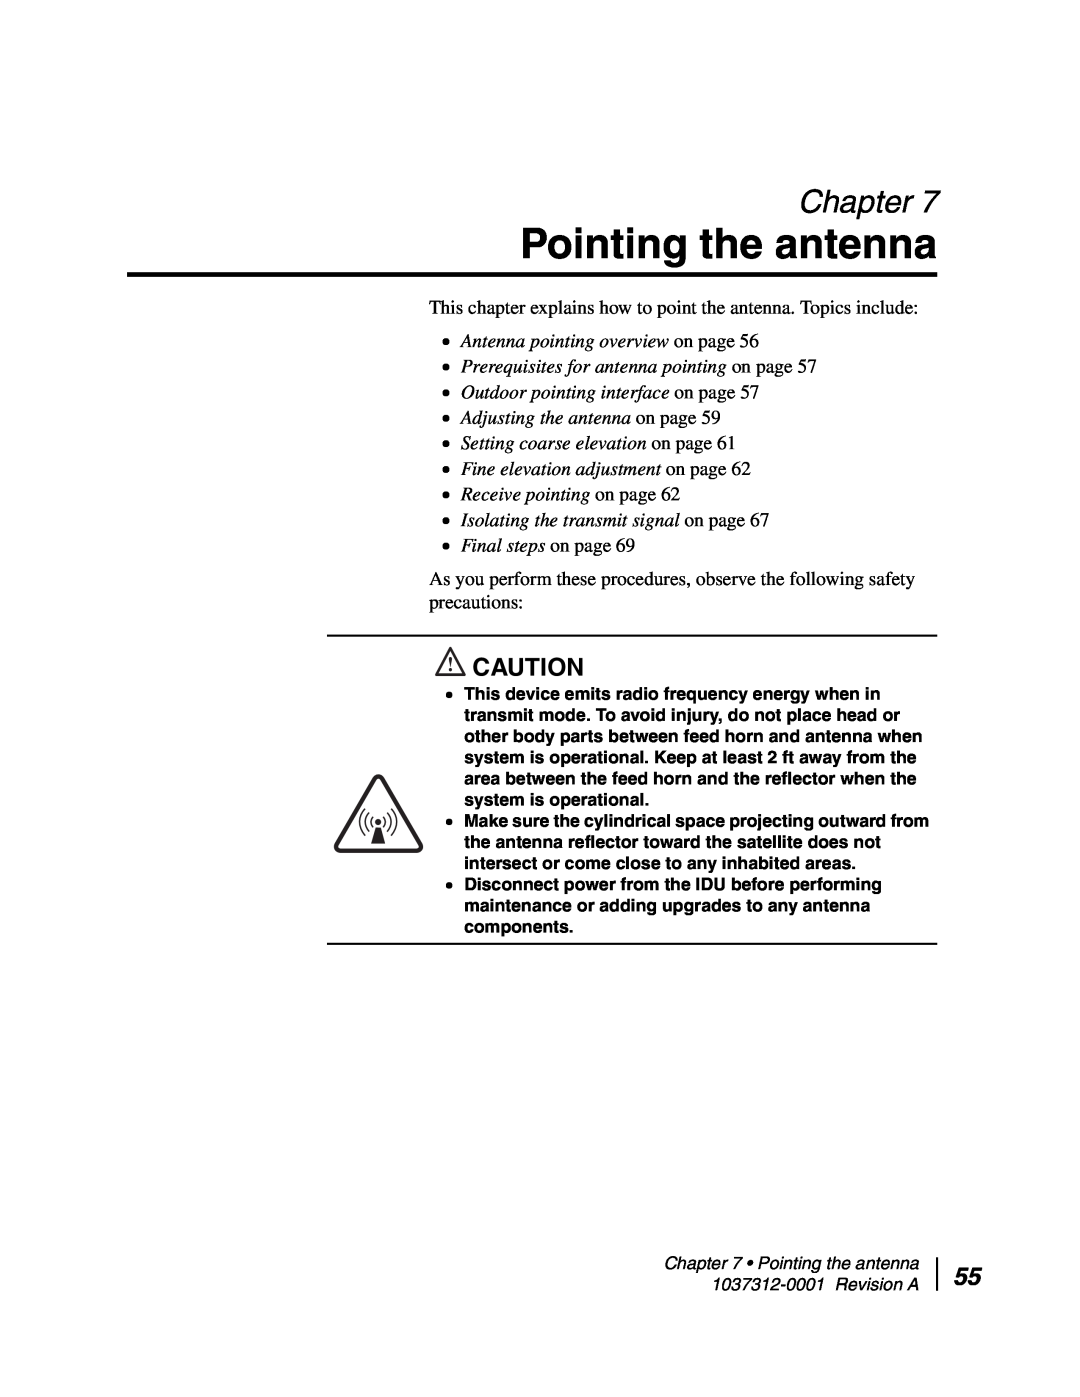 Hughes AN6-098P Pointing the antenna, Chapter, Antenna pointing overview on page, Outdoor pointing interface on page 